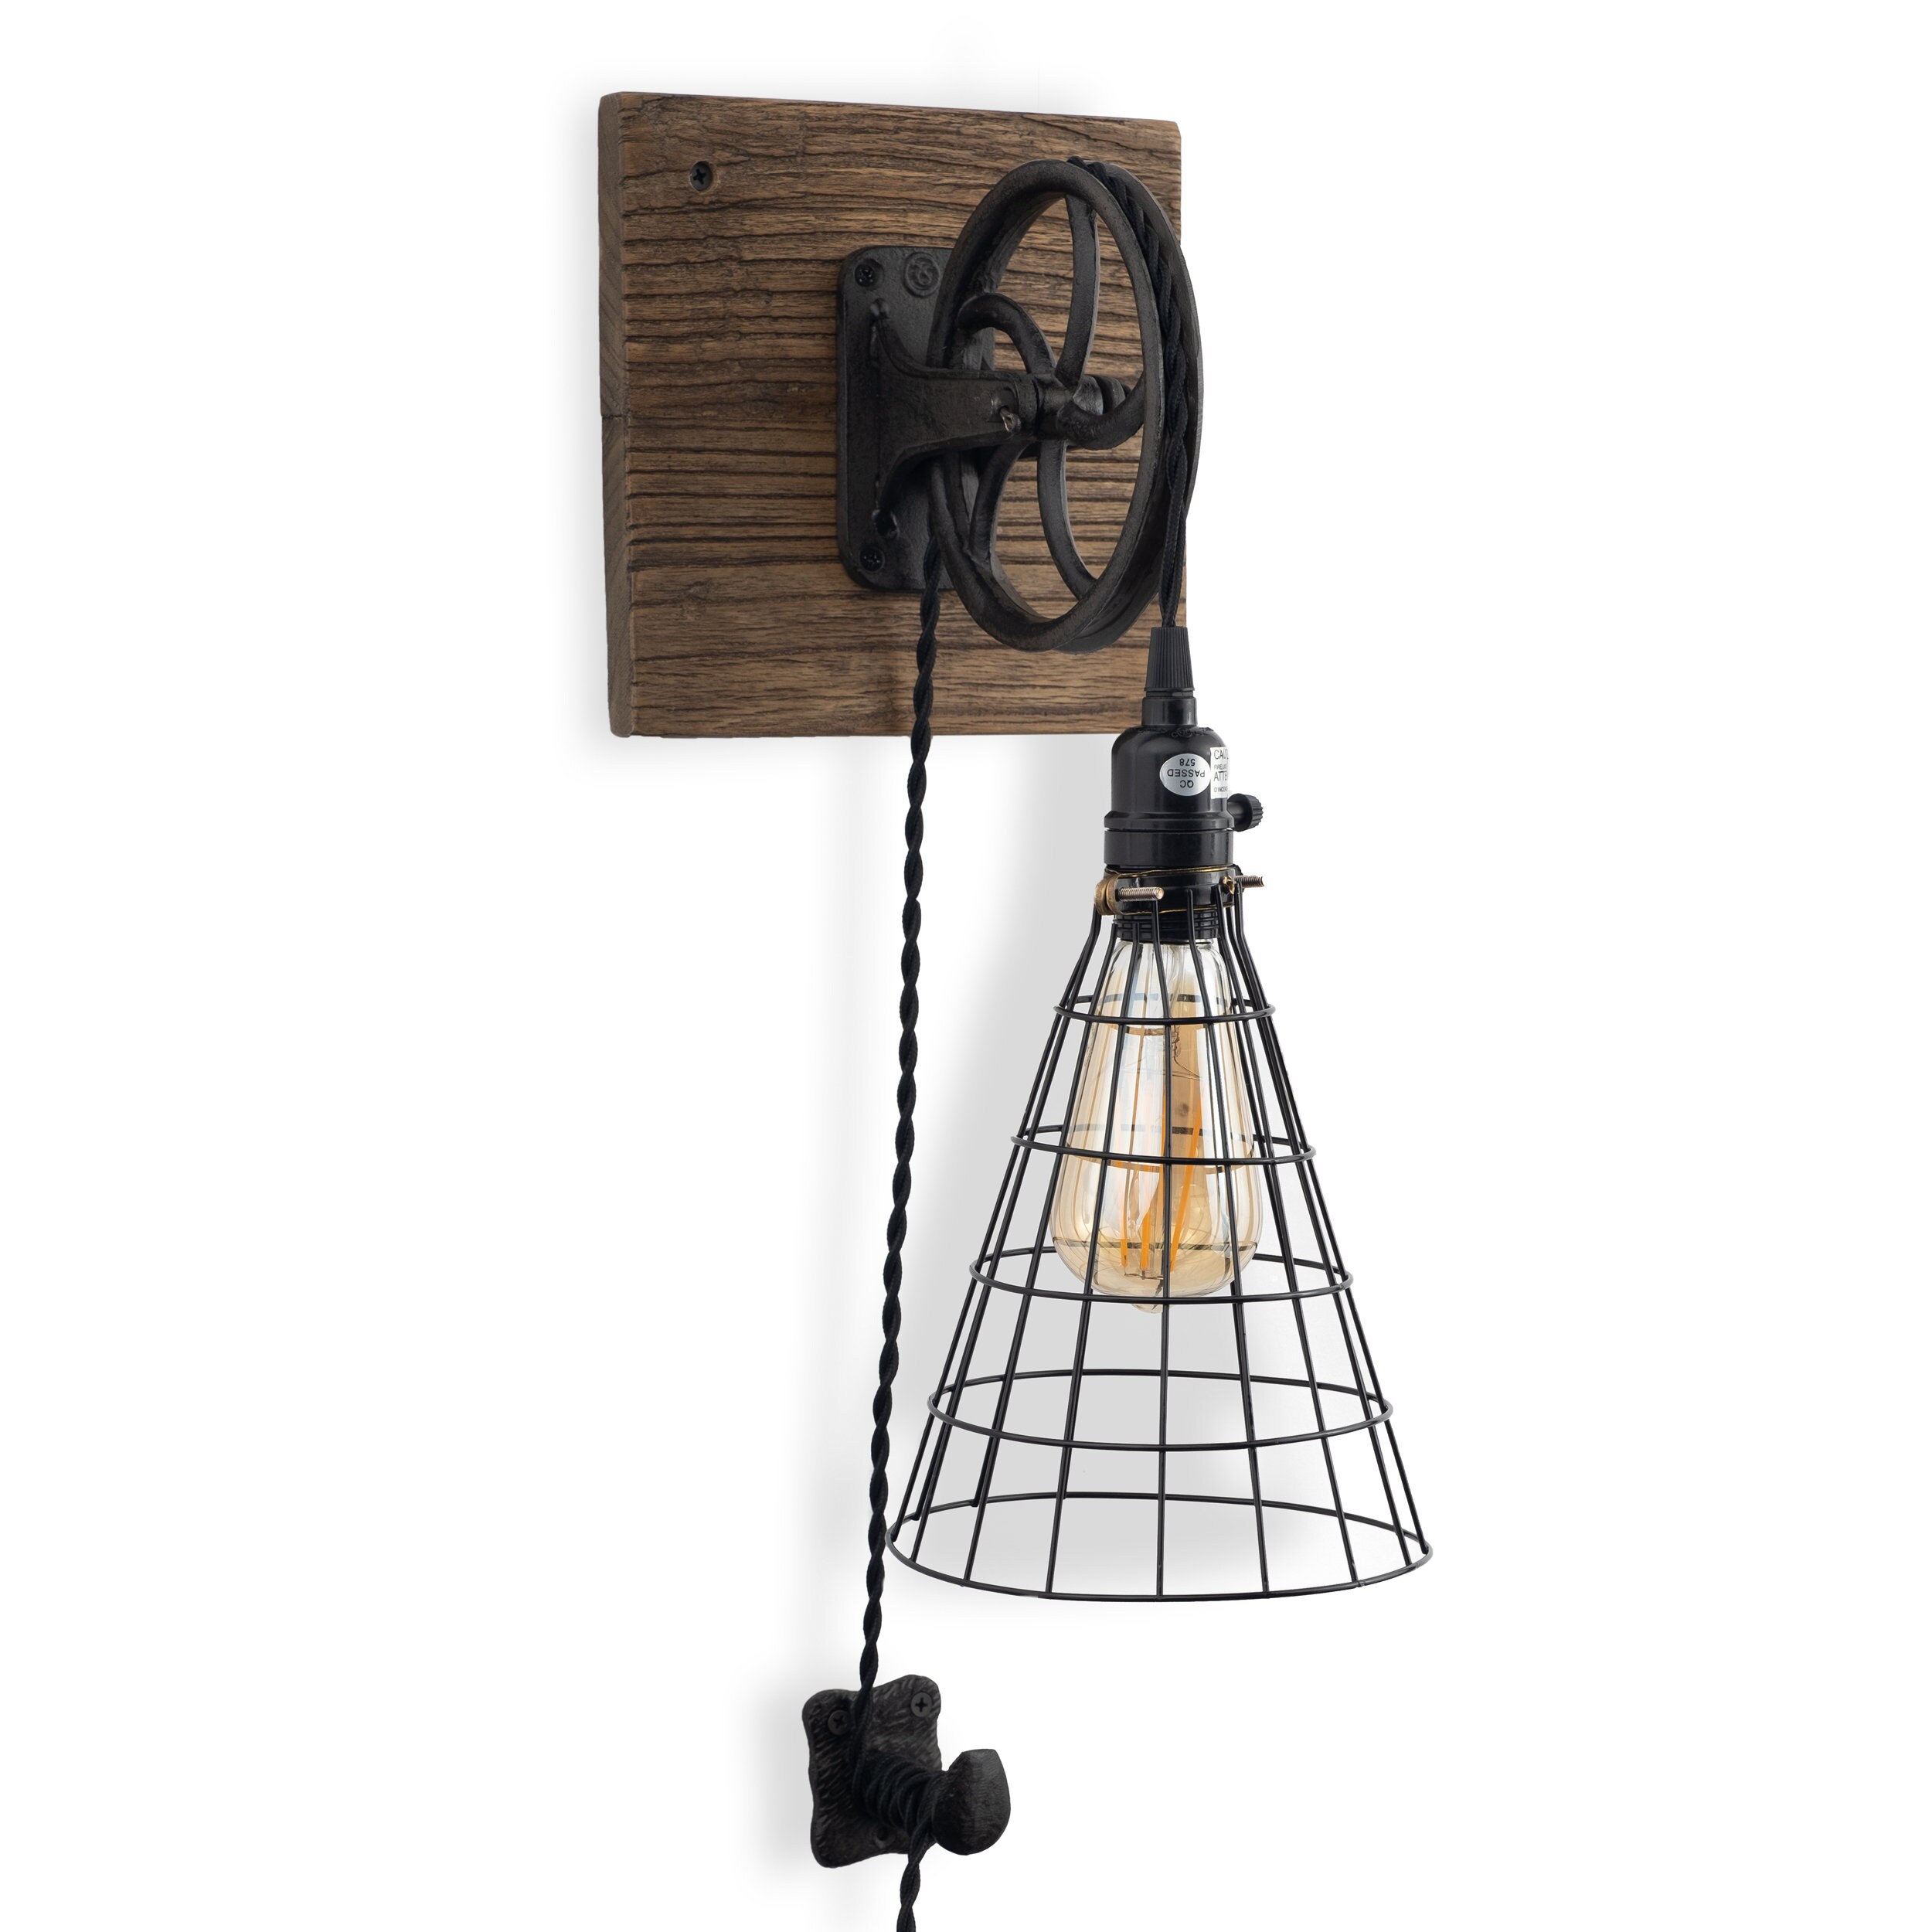 Rustic State Vintage Unique Industrial Wood and Pulley Design Etsy